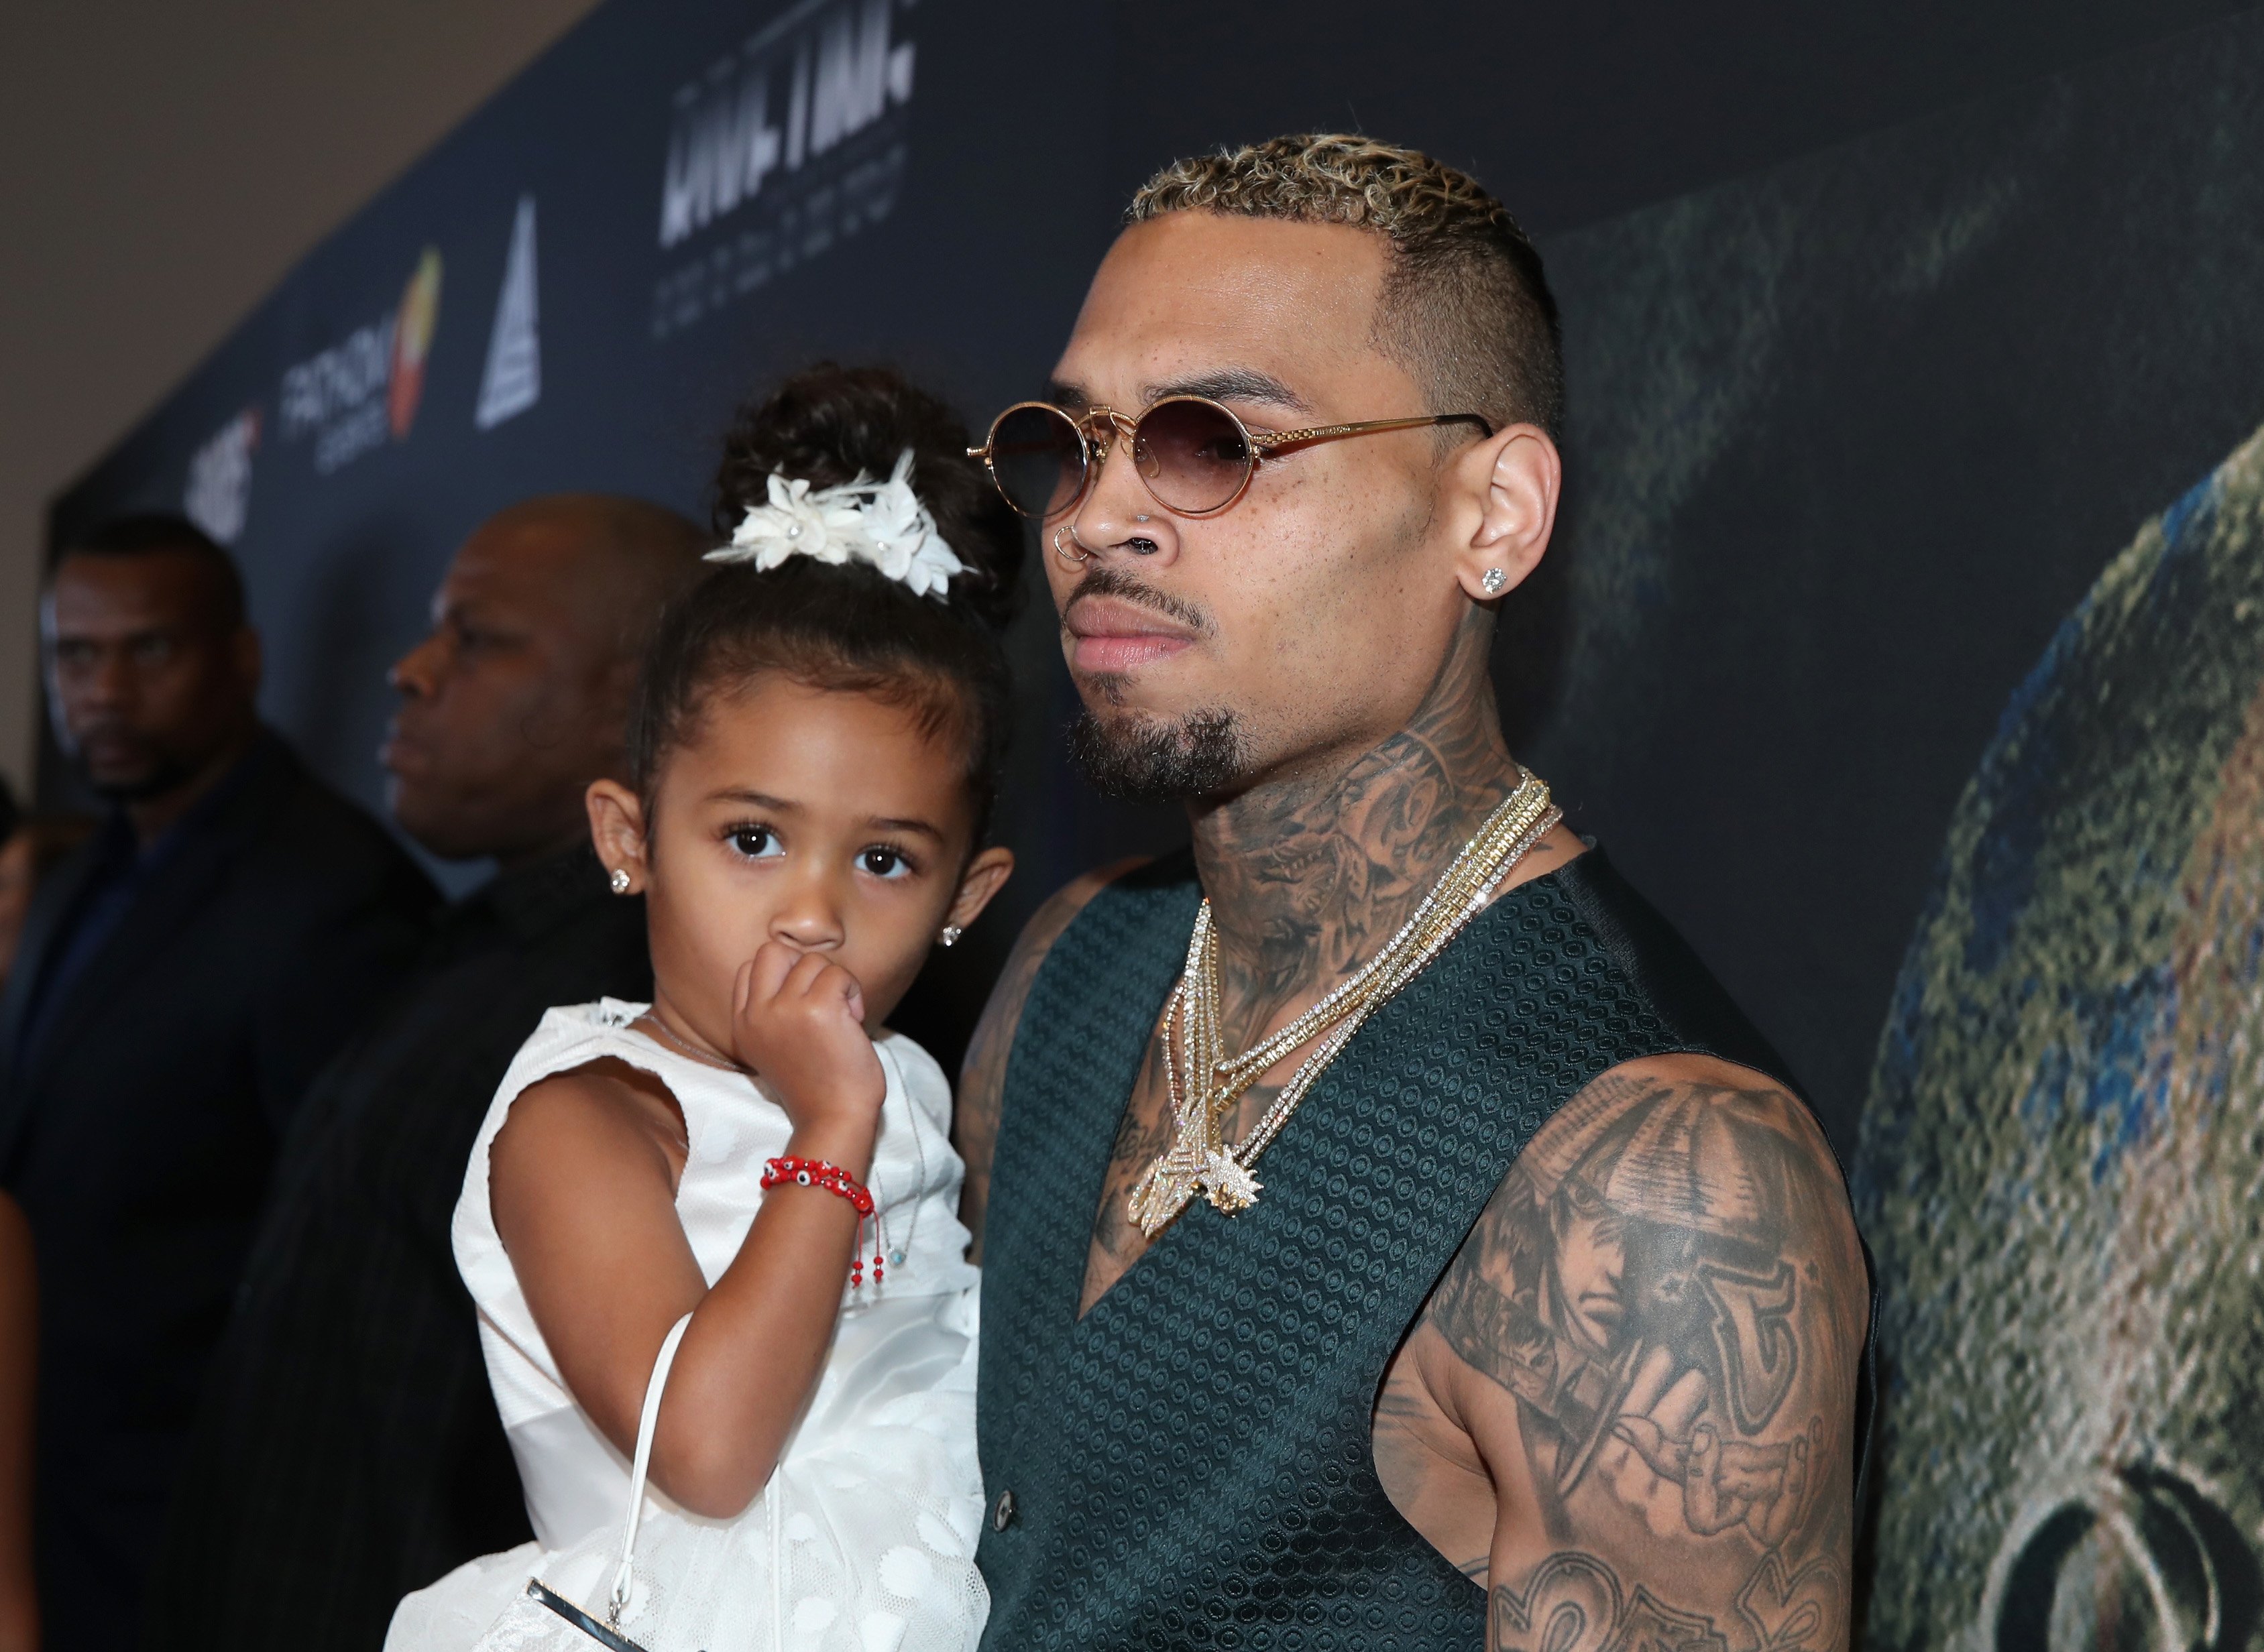 Chris Brown and Royalty Brown at the premiere of "Chris Brown: Welcome To My Life" at L.A. LIVE on June 6, 2017 in Los Angeles, California. | Source: Getty Images